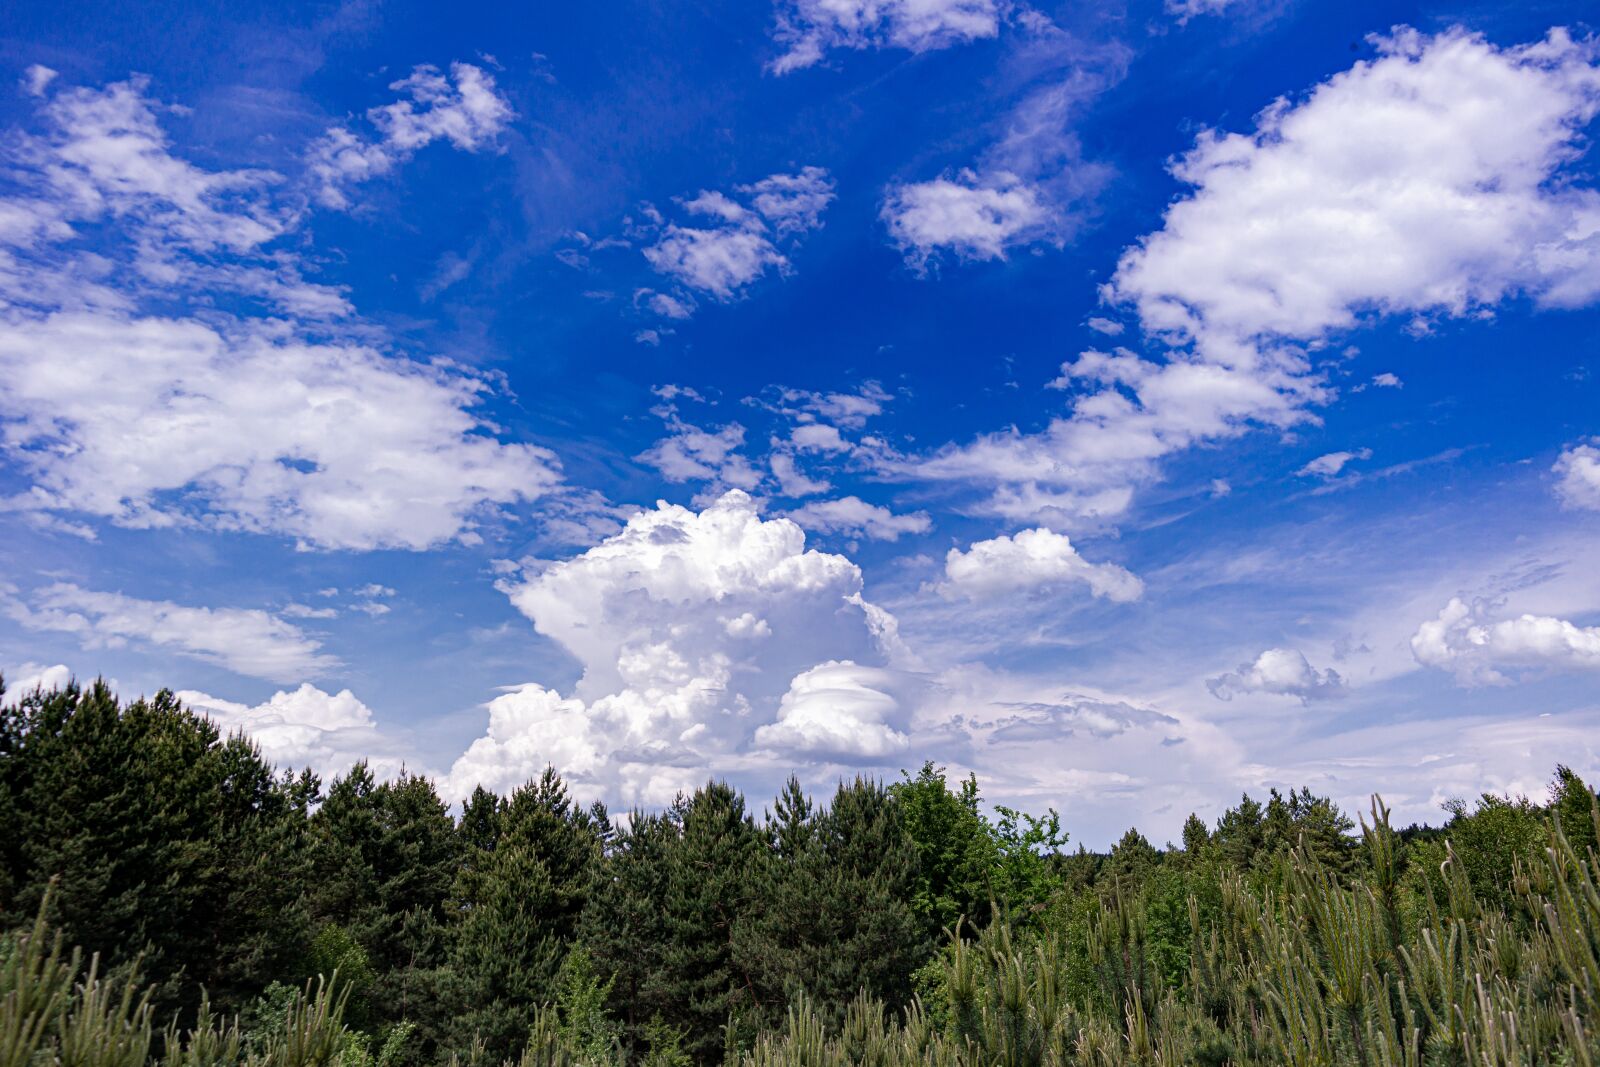 Samsung NX300 sample photo. Nature, sky, clouds photography